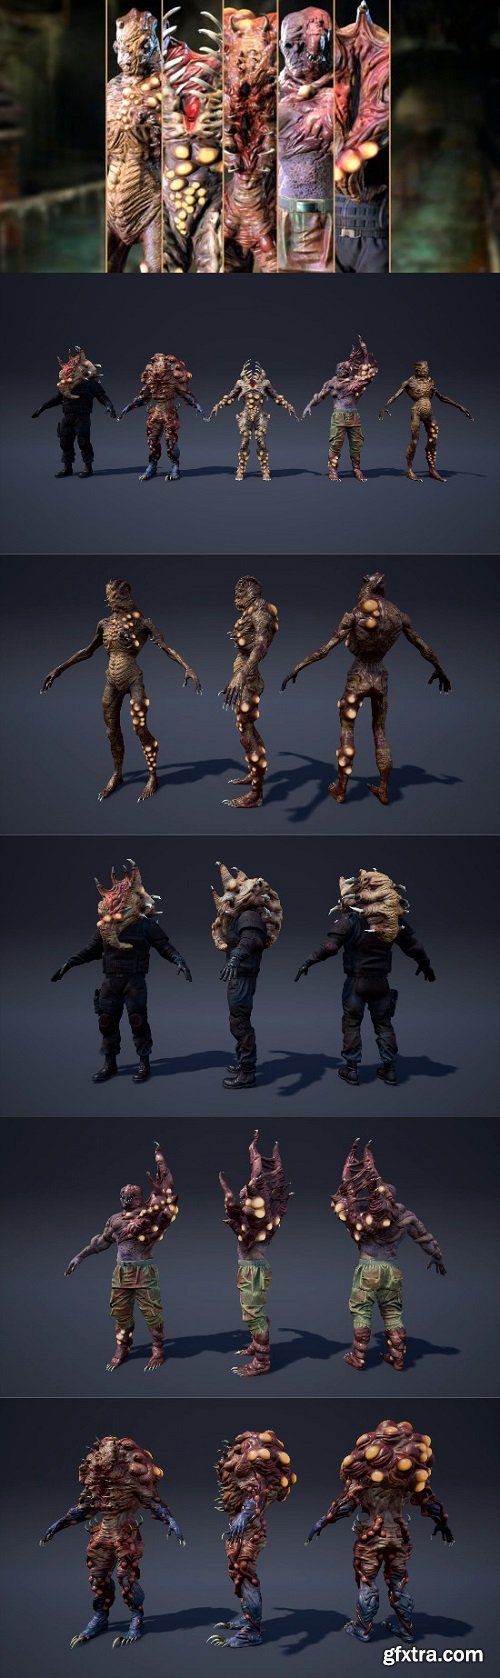 Unreal Engine - Humanoids Creatures Pack